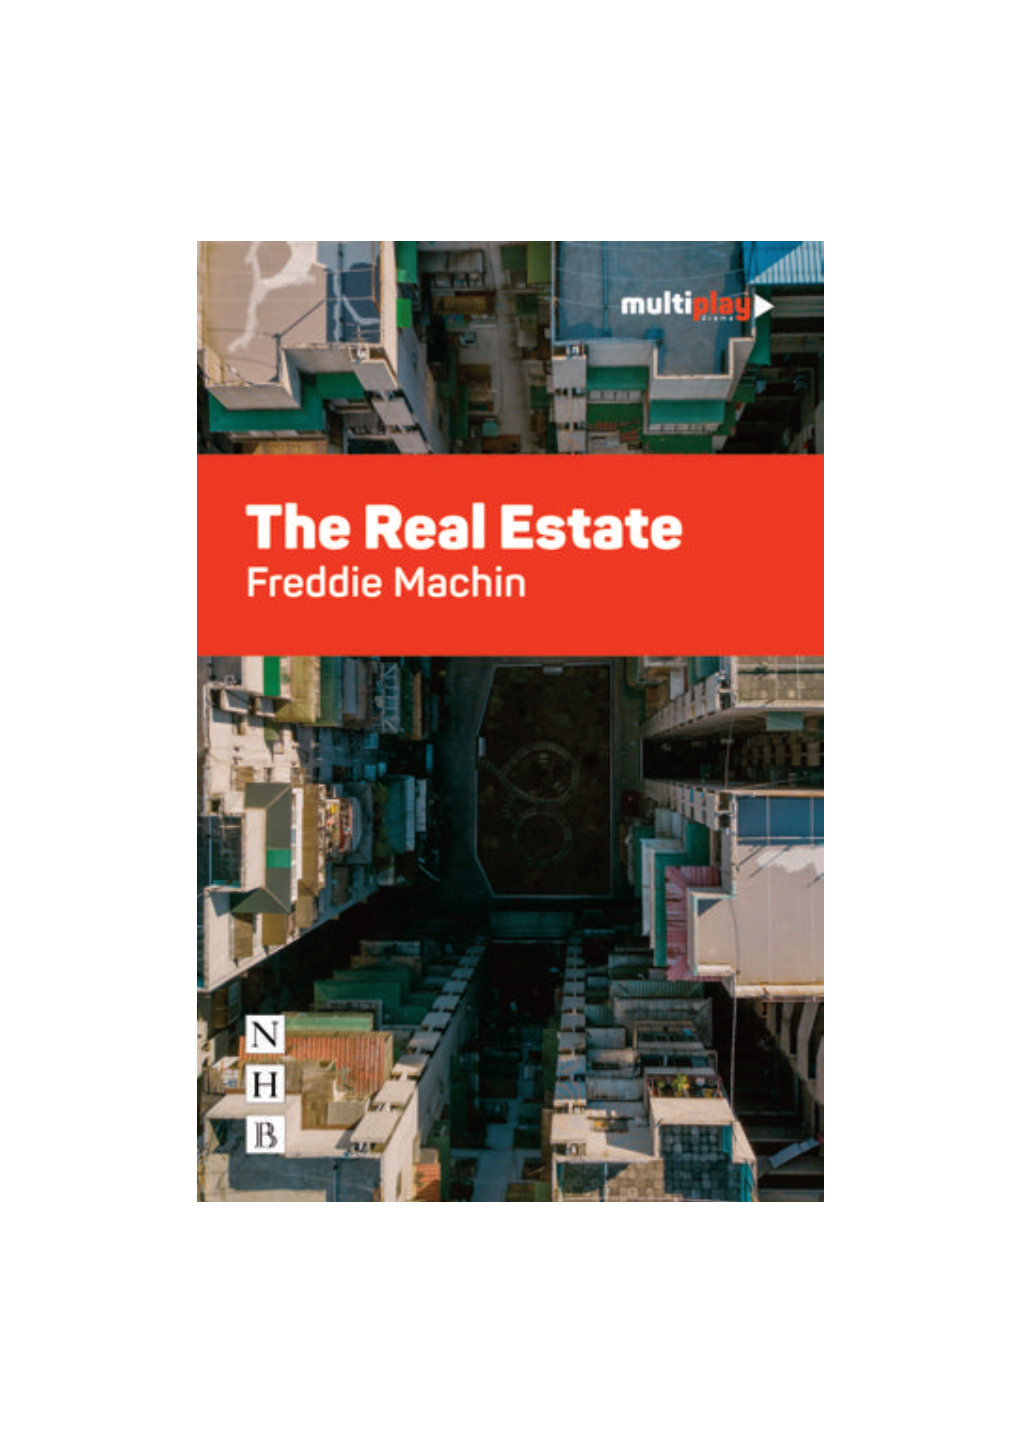 The Real Estate Extract